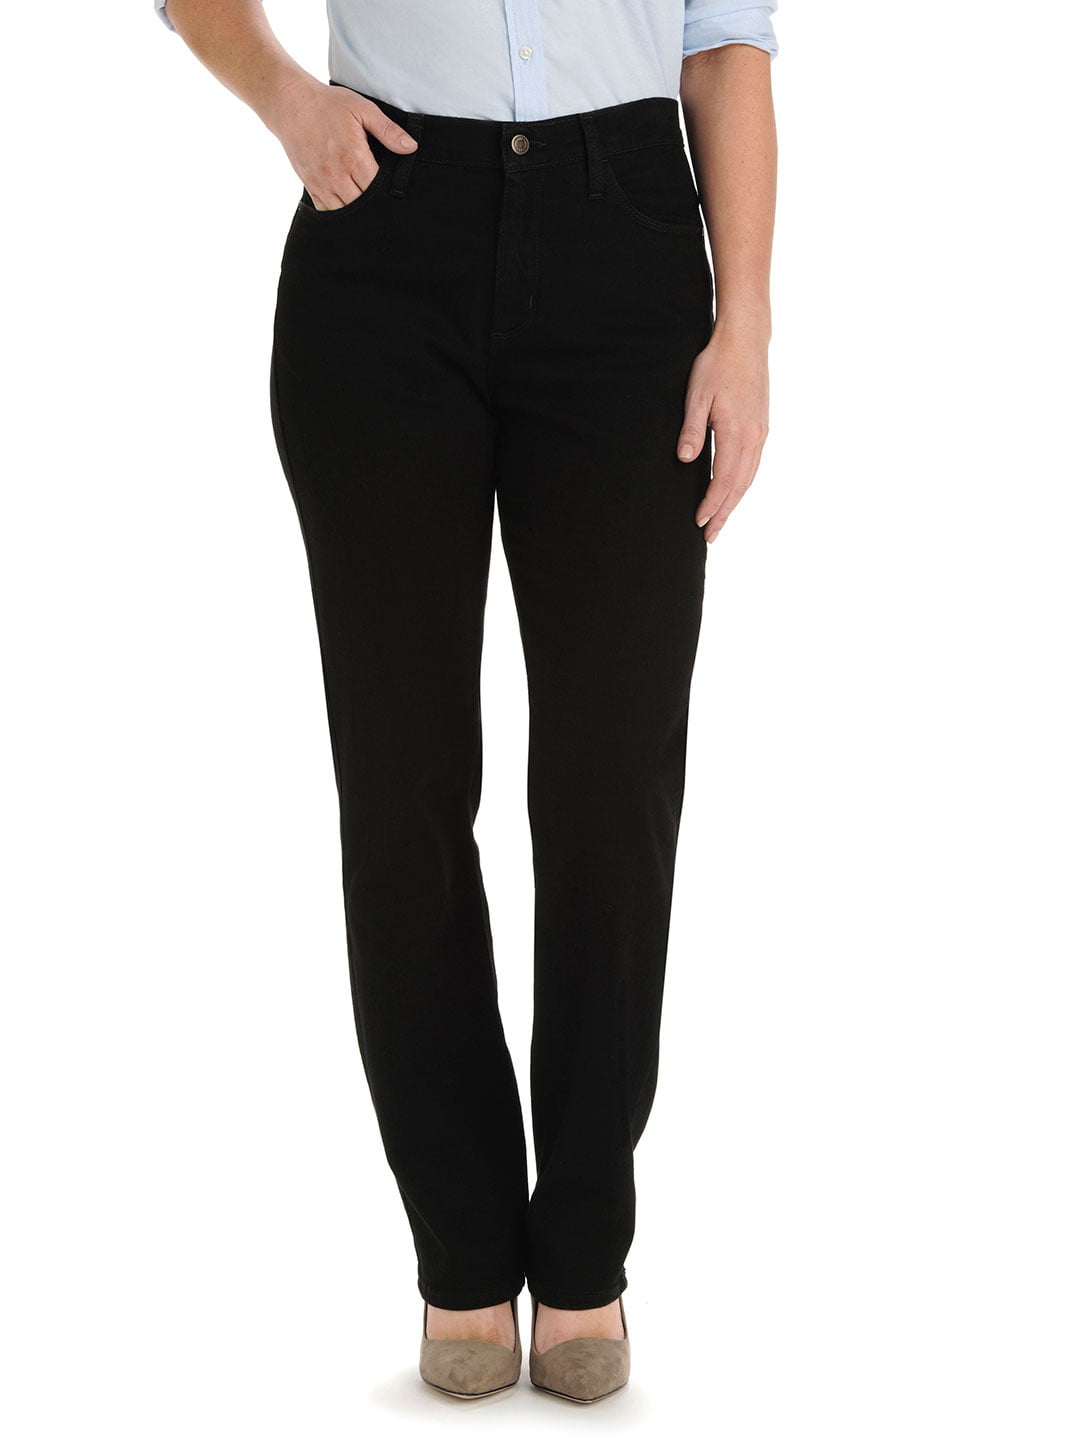 Lee - Lee Women's Stretch Relaxed Fit Straight Leg Jeans - Black